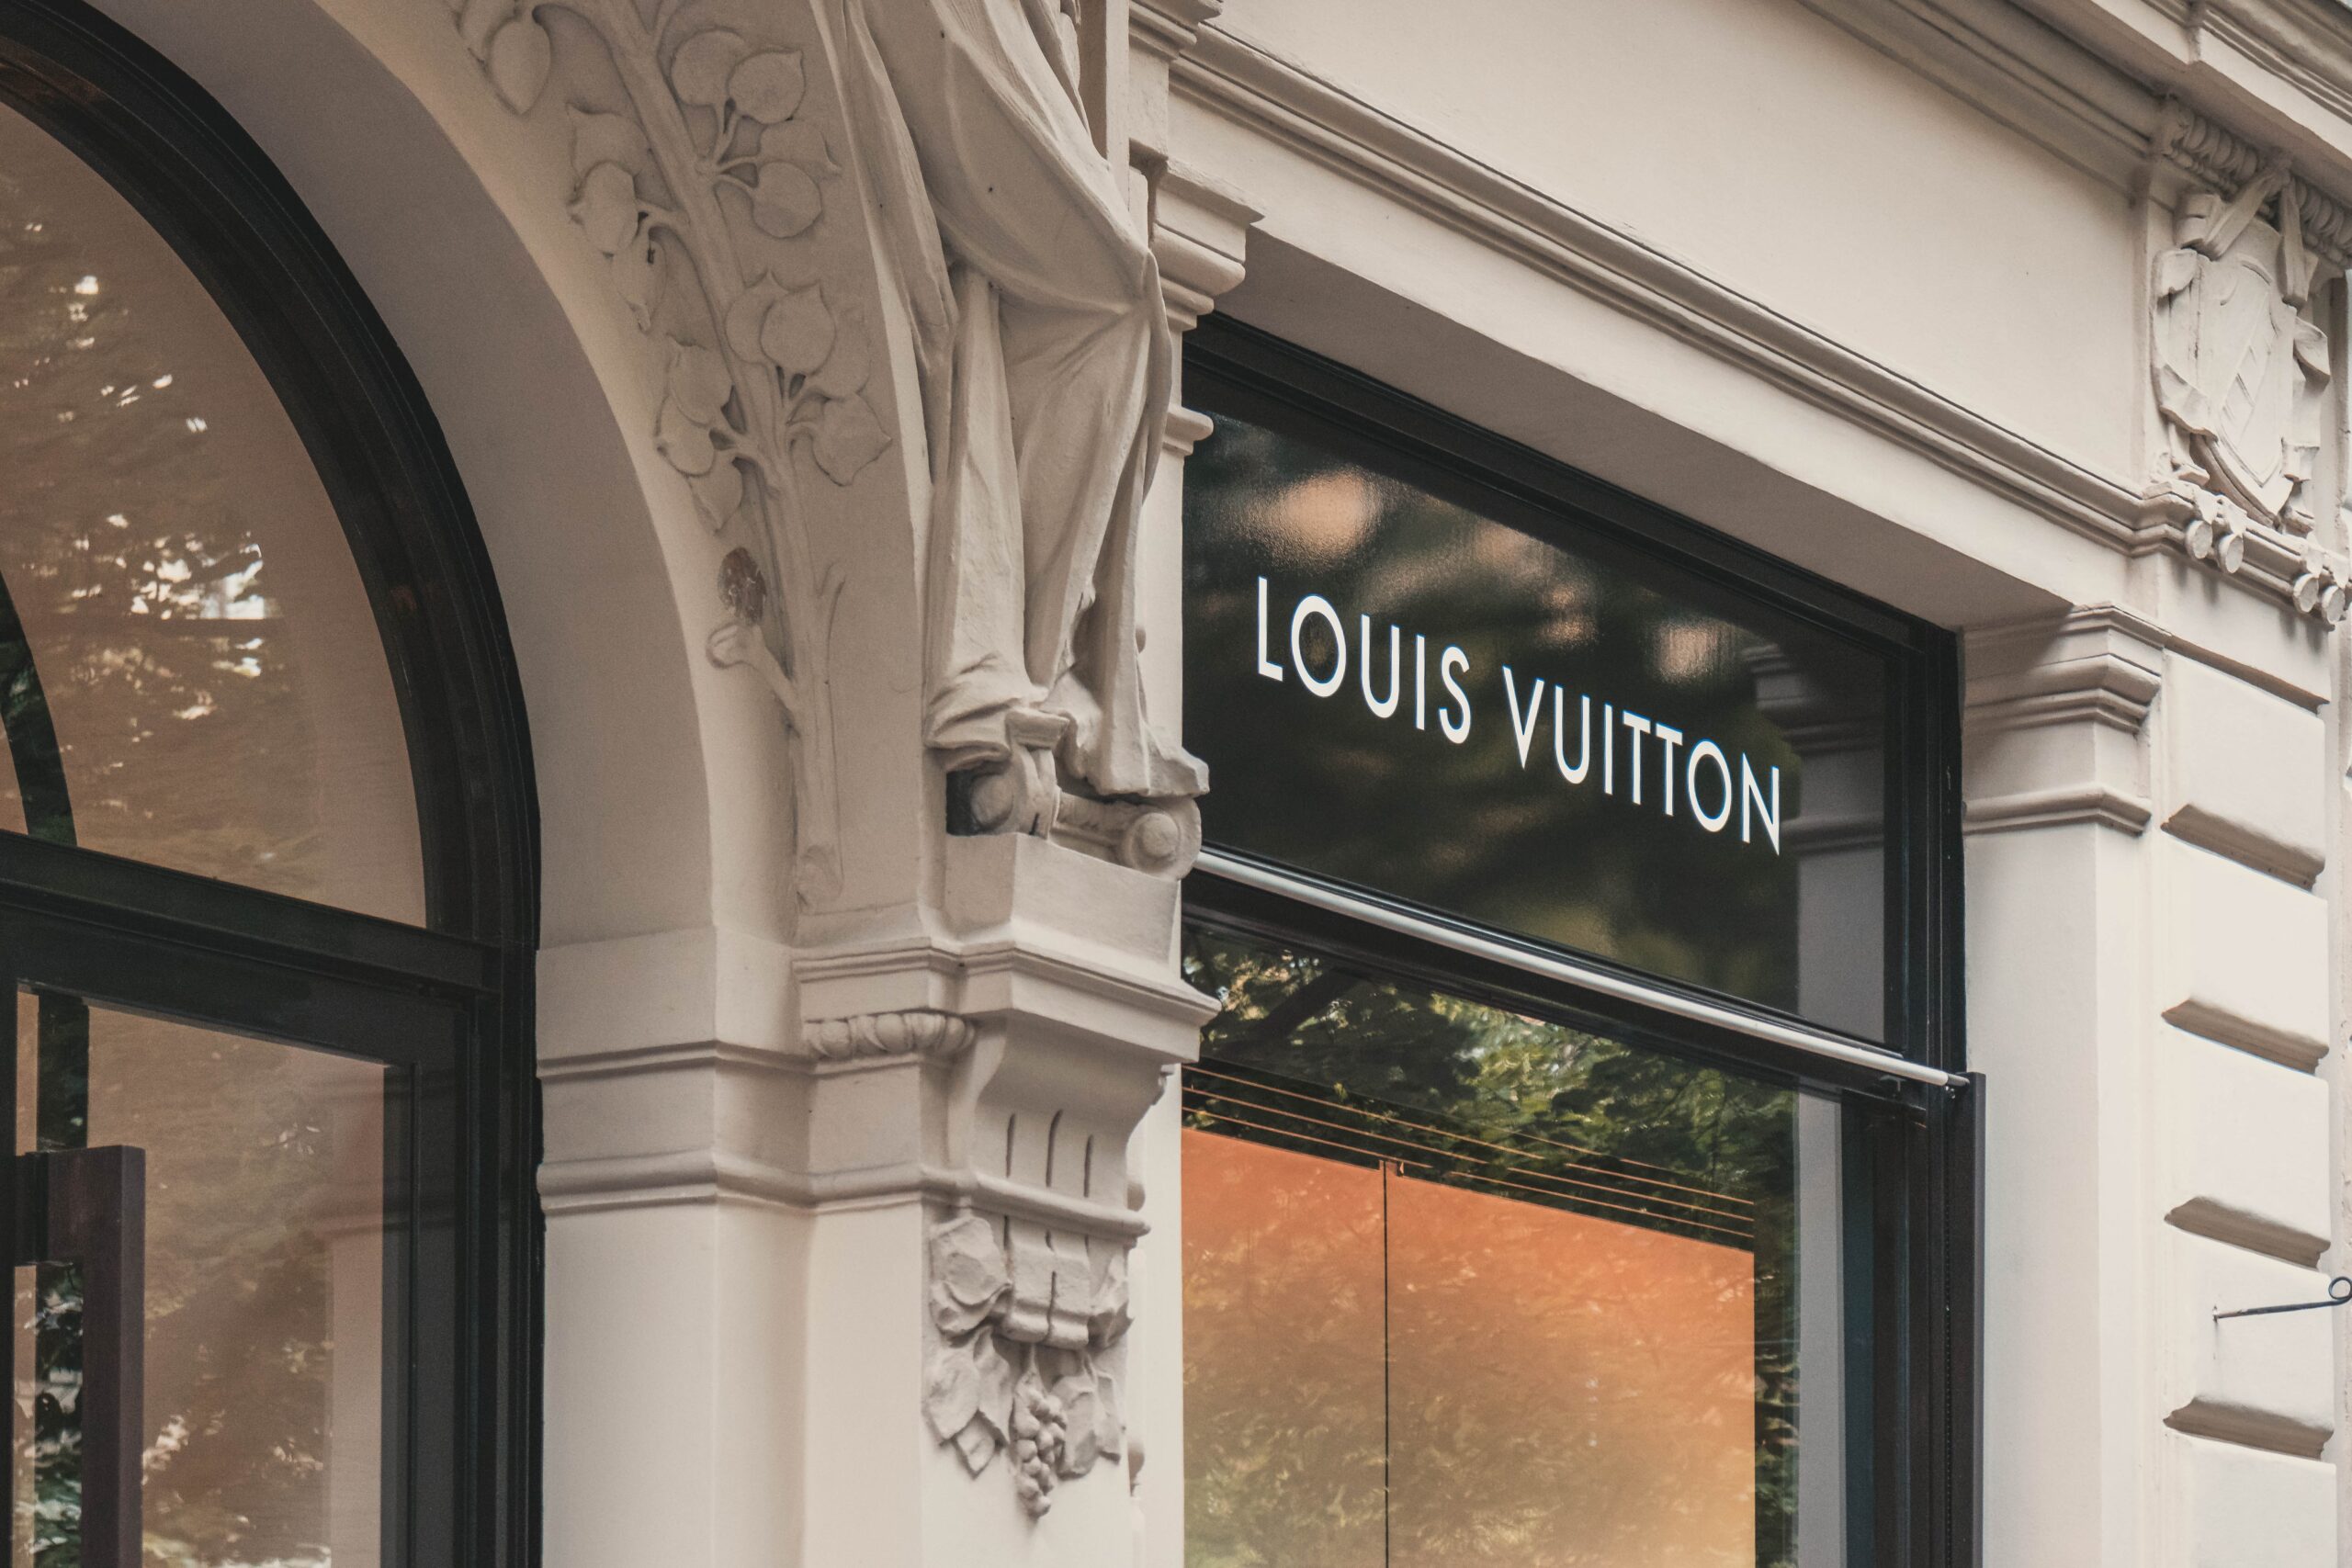 The Homeless Boy Who Invented Louis Vuitton 